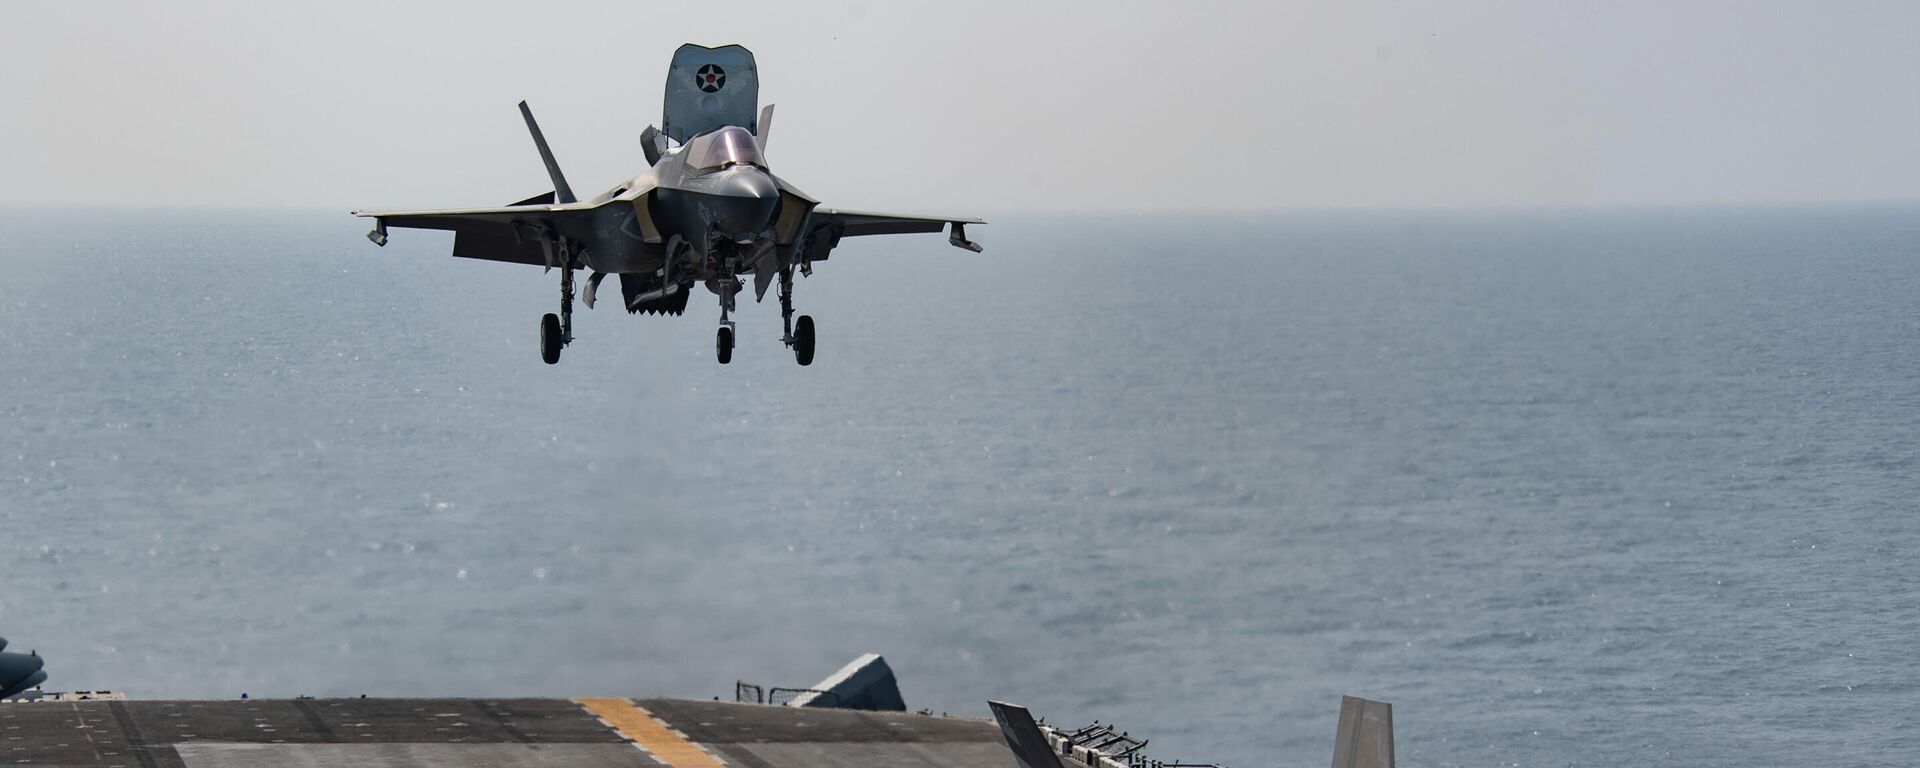 F-35B Lightning II attached to Marine Fighter Attack Squadron (VMFA) 211, deployed with the British Royal Navy aircraft carrier HMS Queen Elizabeth, lands on the flight deck of the amphibious assault ship USS Essex (LHD 2) during an interoperability exercise with Queen Elizabeth, Nov. 8. Essex and the 11th Marine Expeditionary Unit are deployed to the U.S. 5th Fleet area of operations in support of naval operations to ensure maritime stability and security in the Central Region, connecting the Mediterranean and the Pacific through the western Indian Ocean and three strategic choke points. - Sputnik International, 1920, 16.12.2023